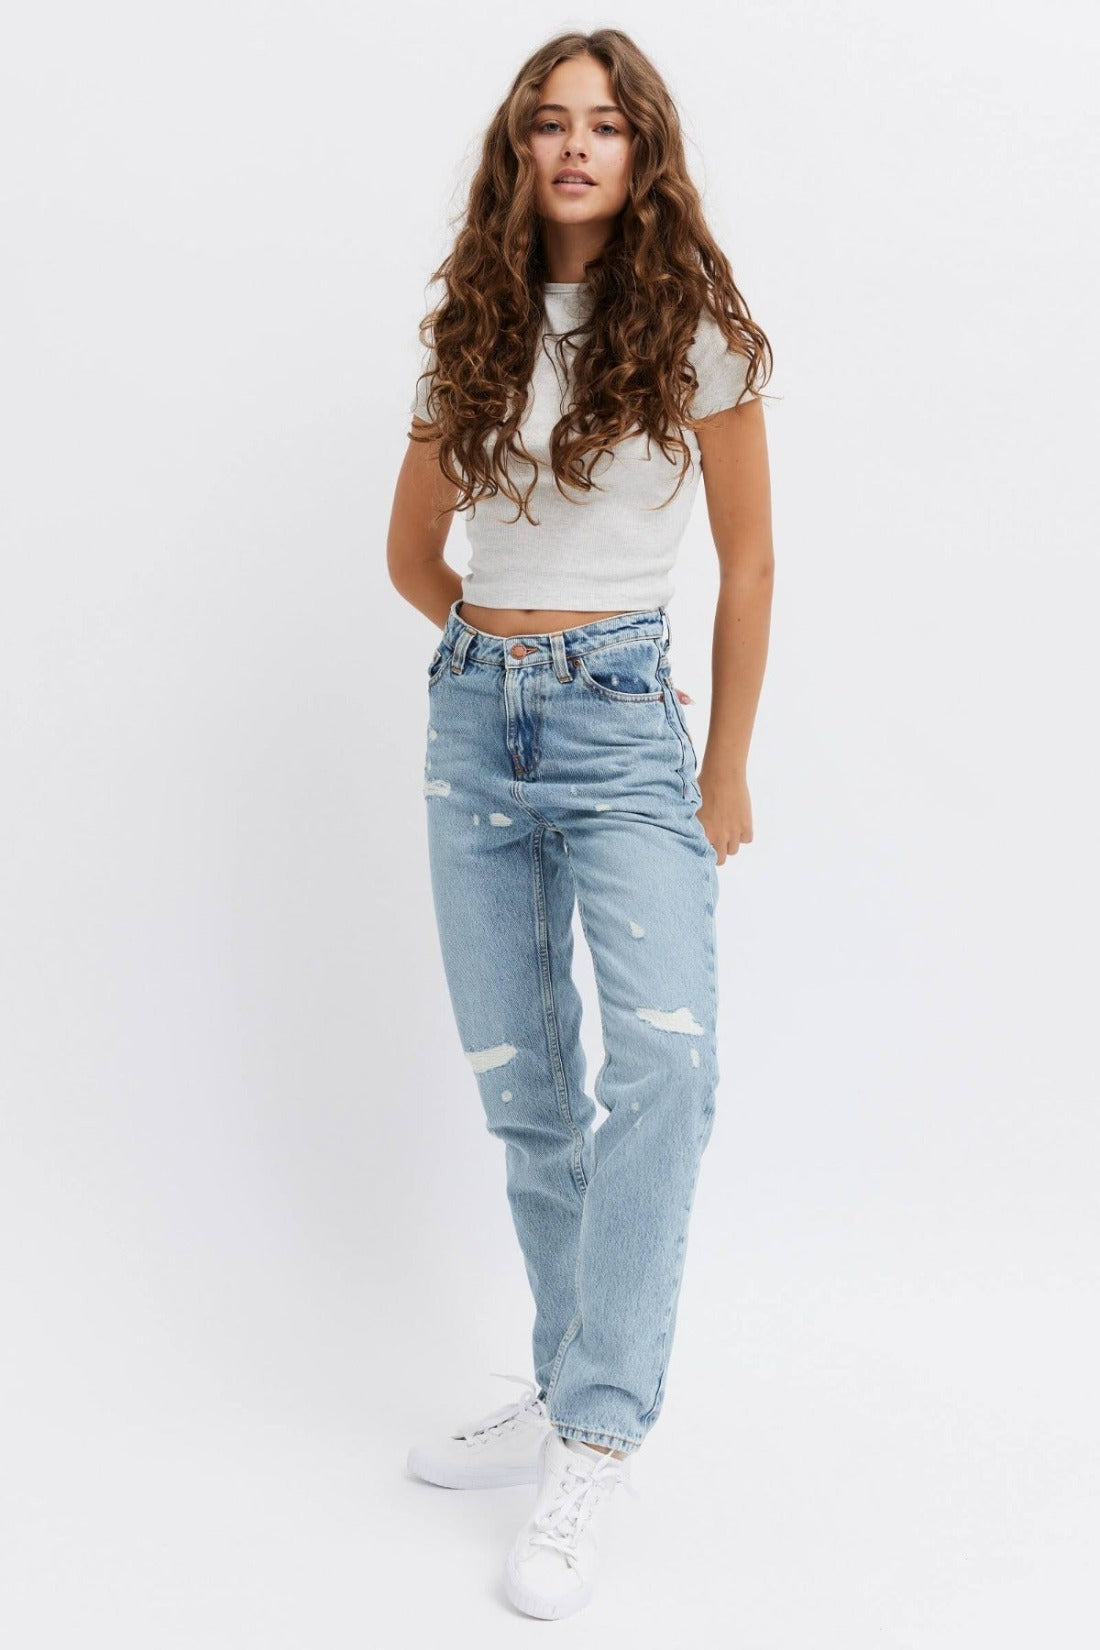 Lease girl's jeans